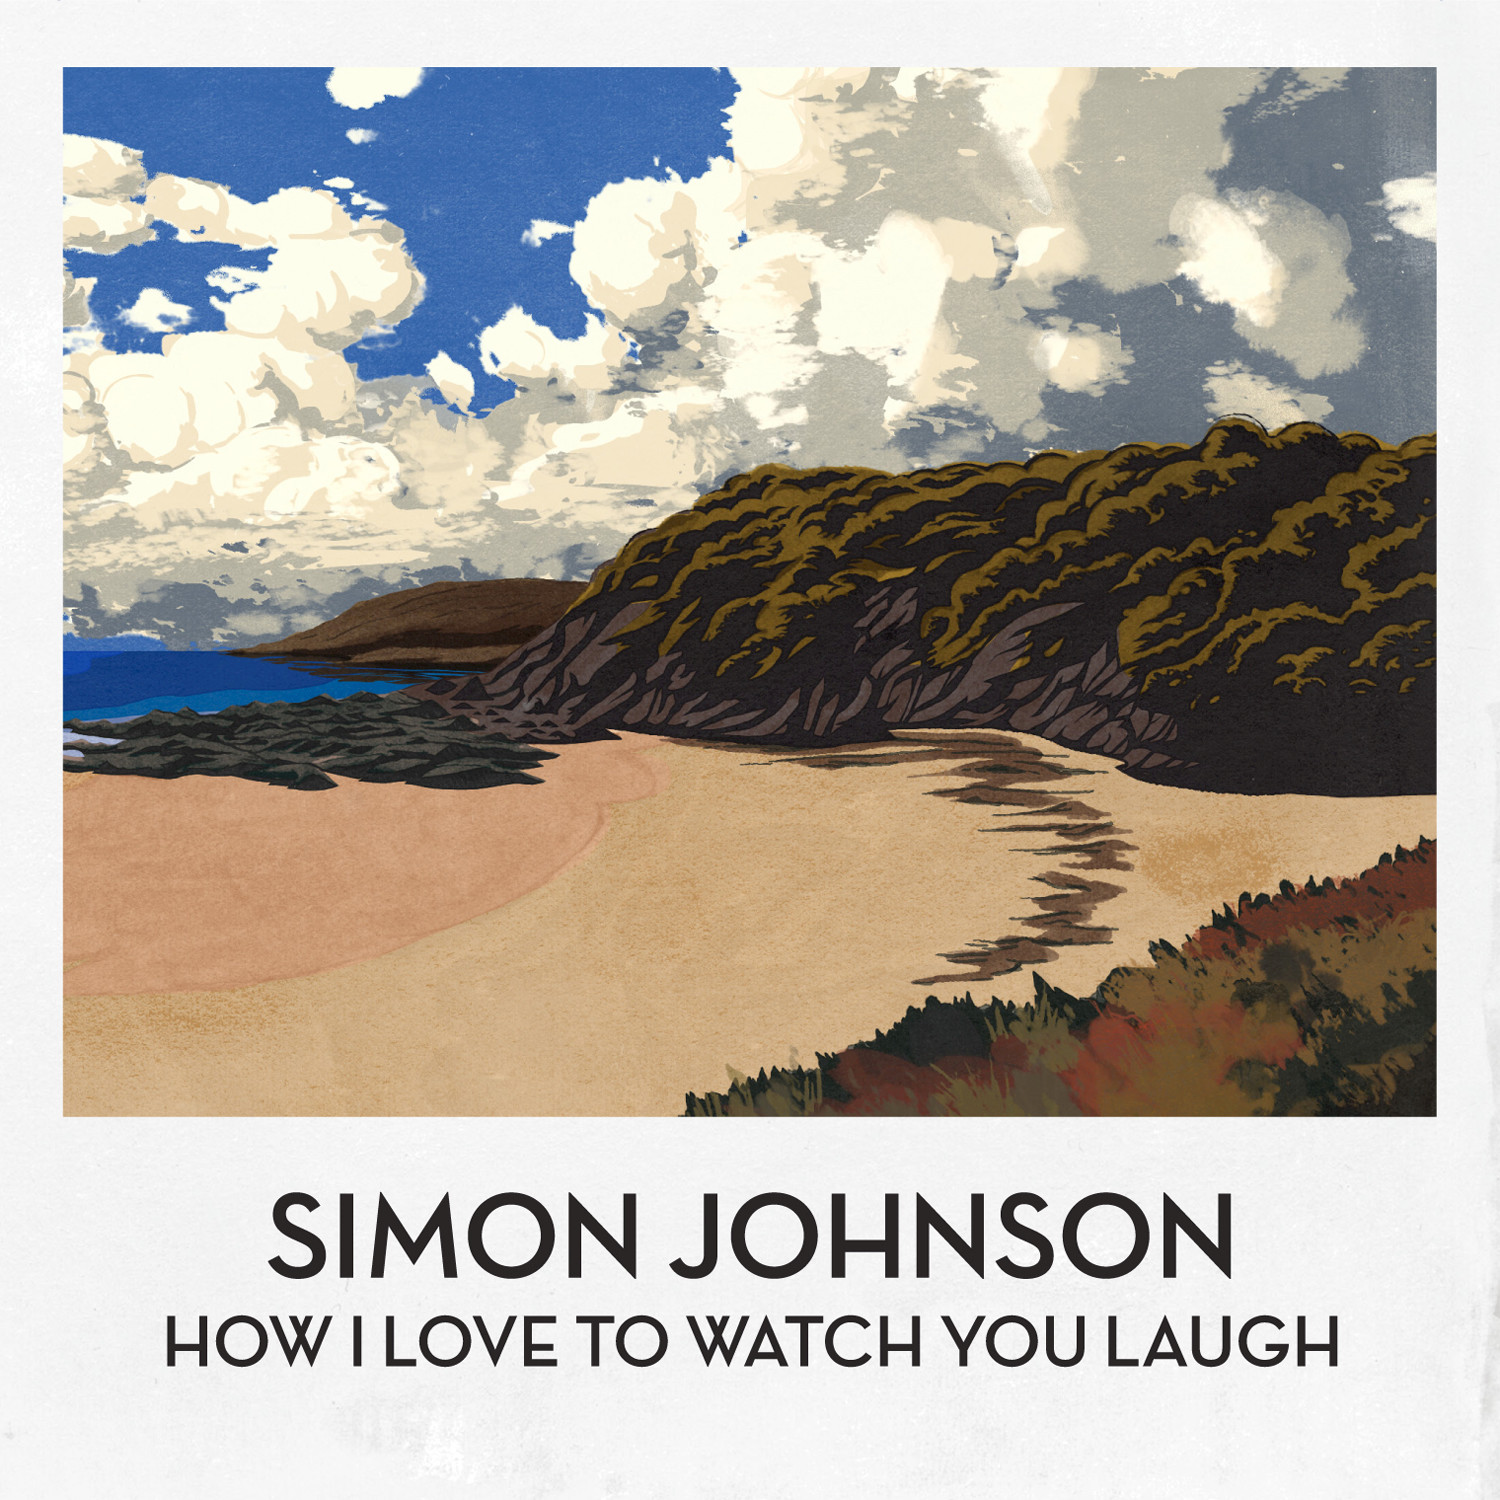 How I Love to Watch You Laugh